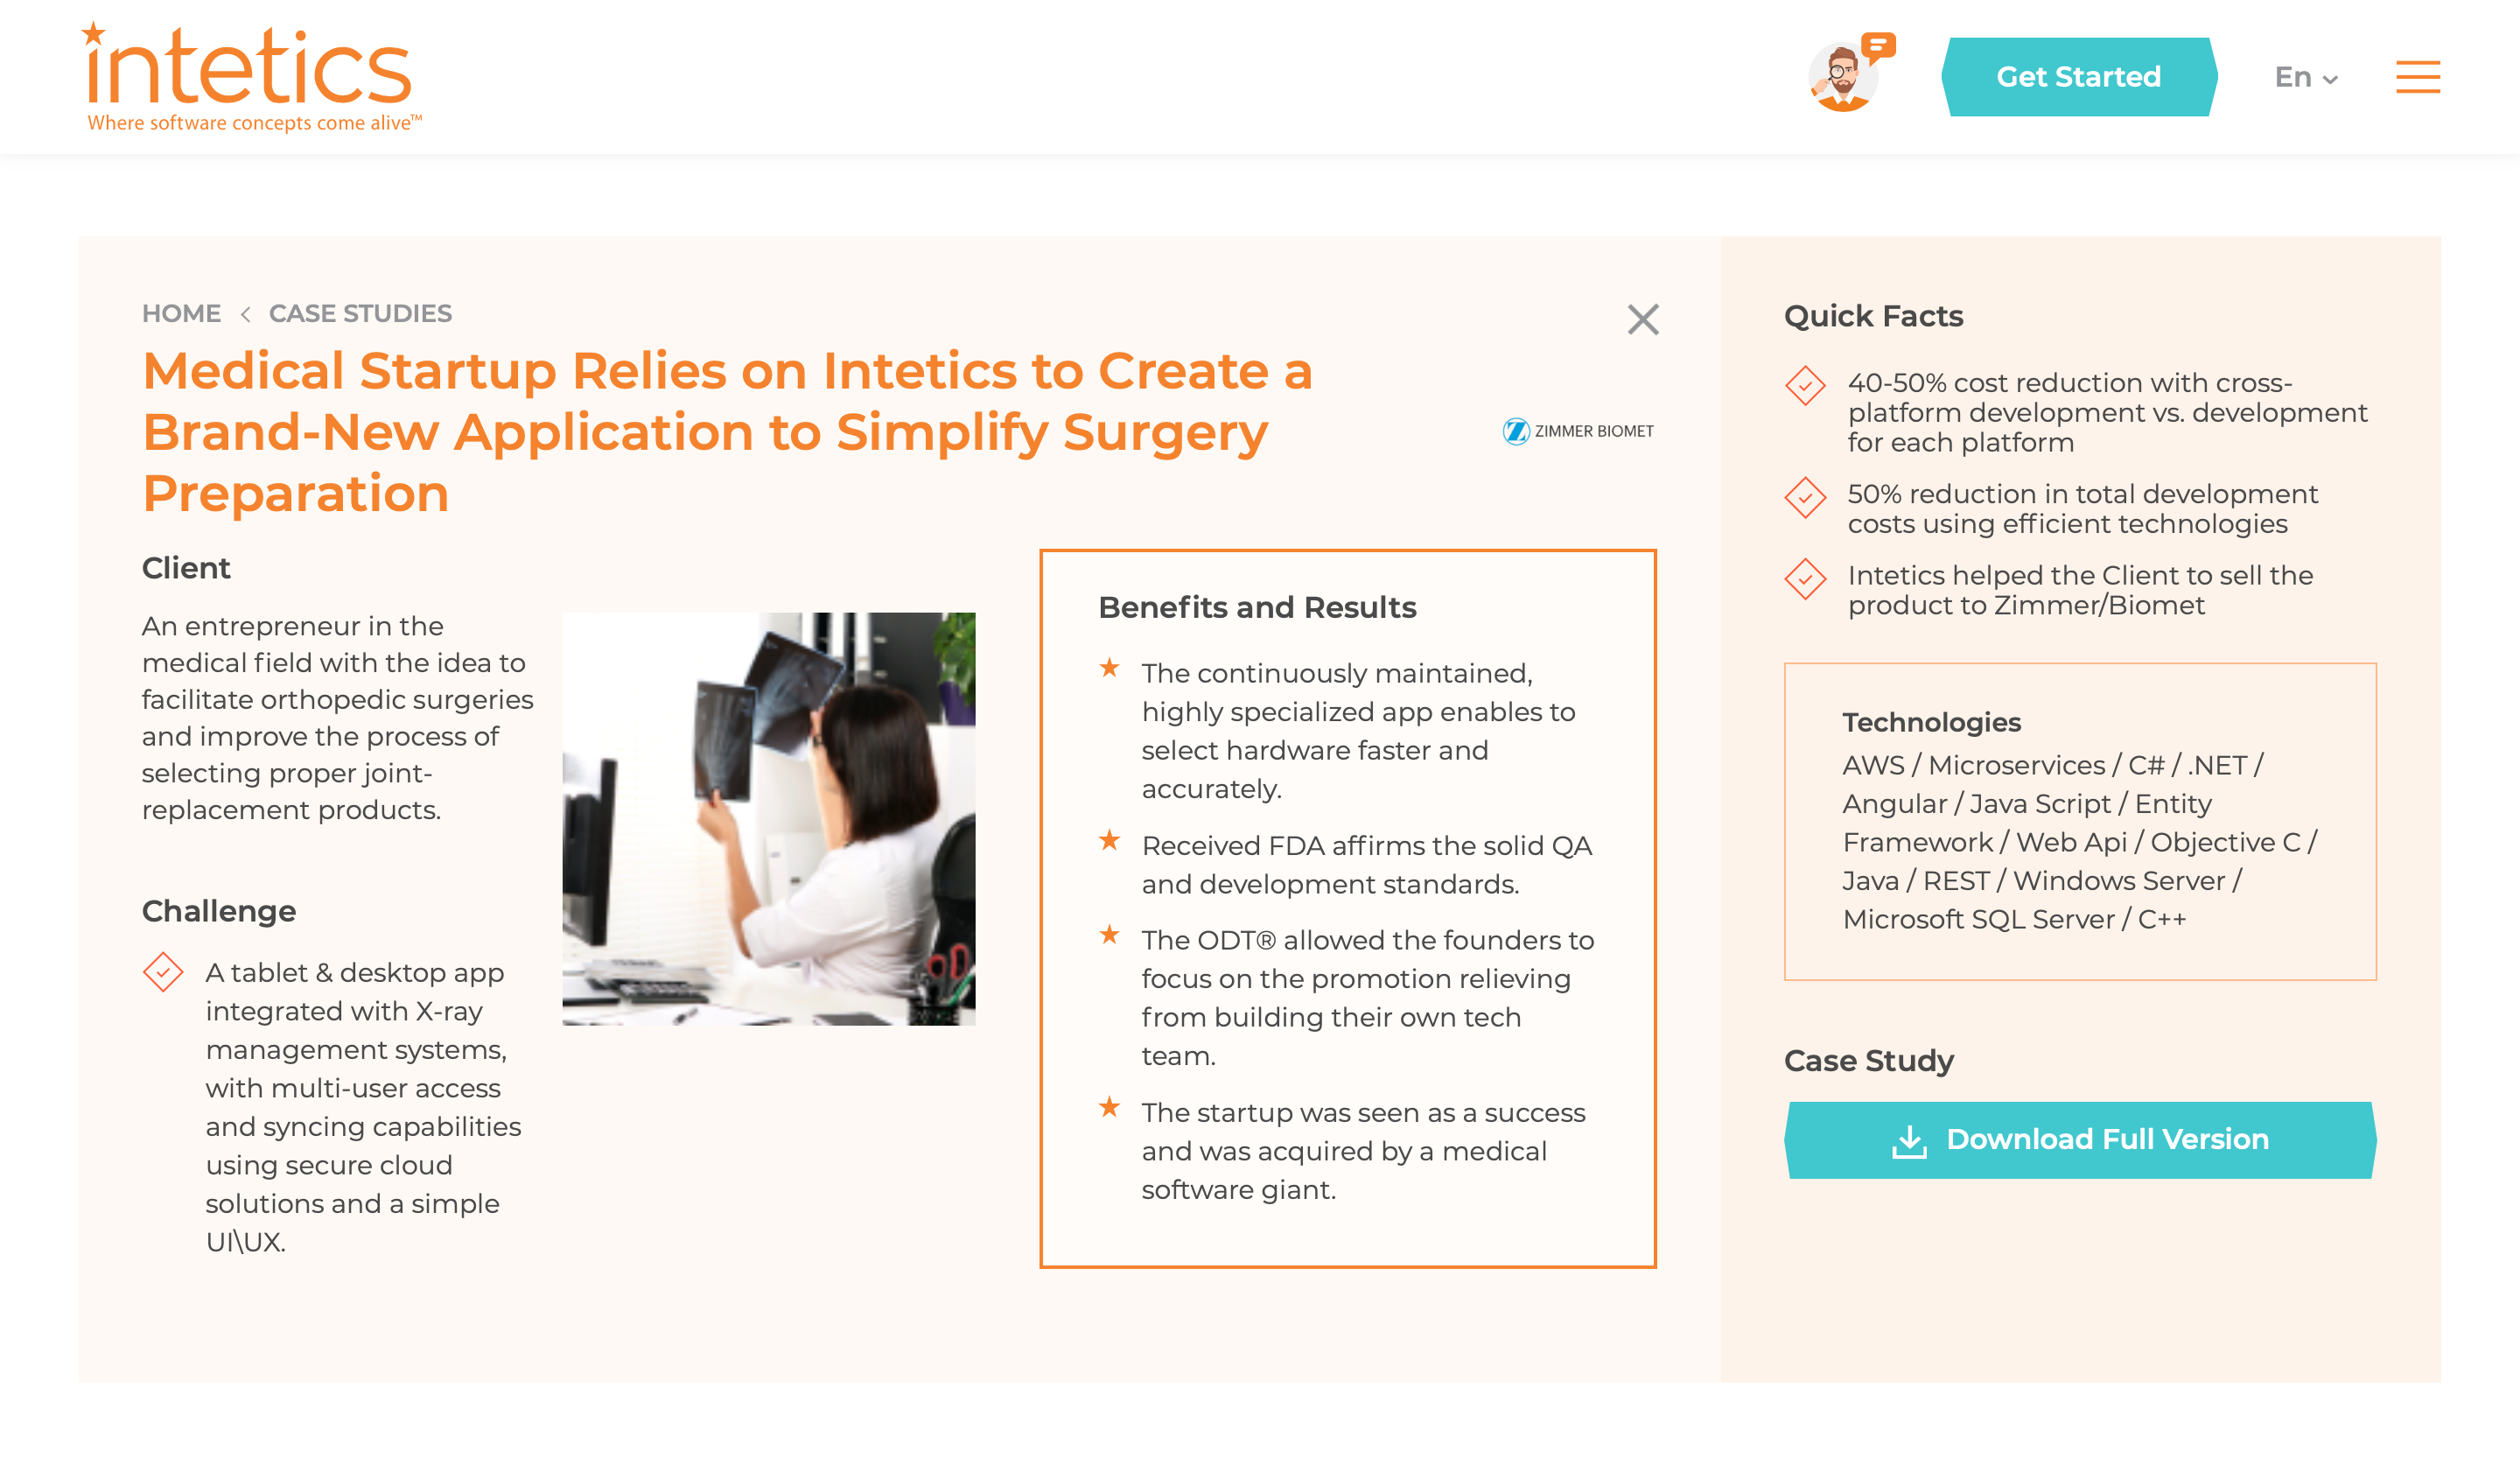 Medical Startup Relies on Intetics to Create a Brand-New Application to Simplify Surgery Preparation